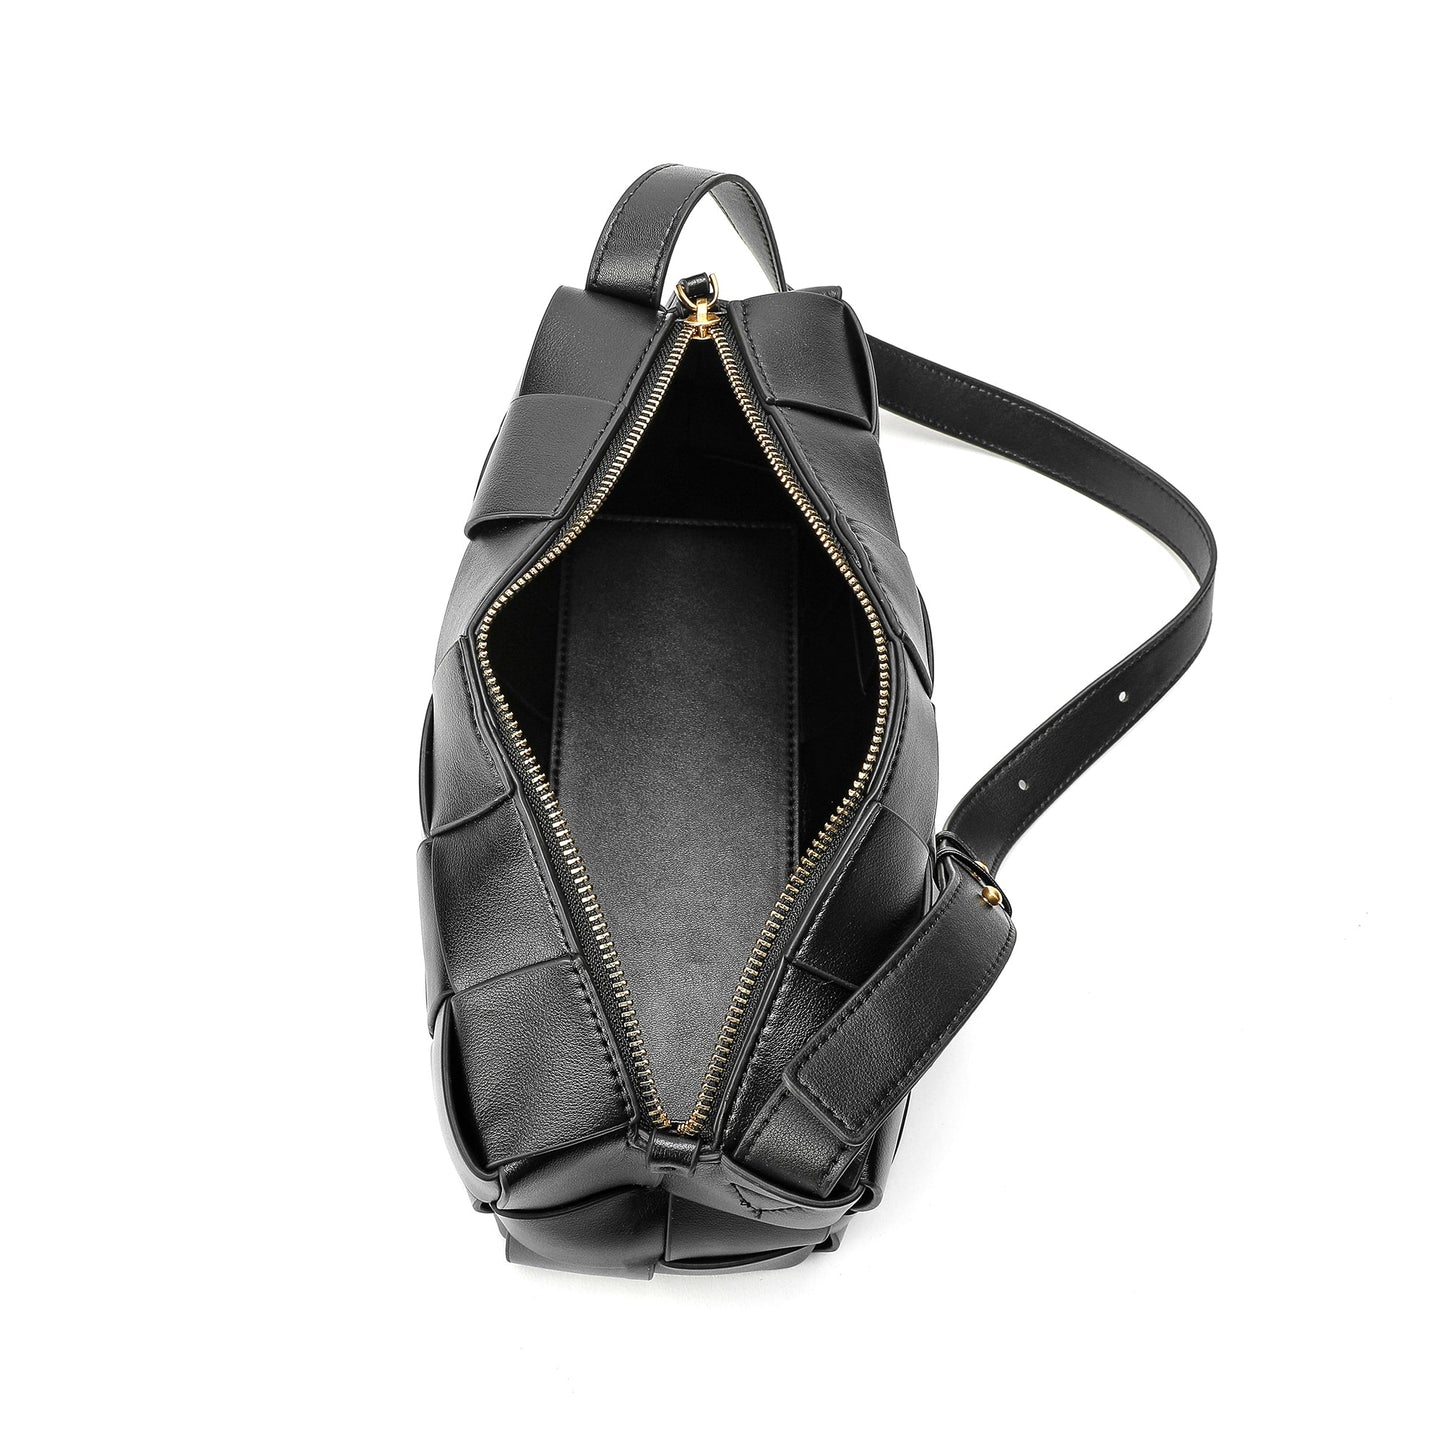 Smooth Woven Leather Hobo/Shoulder